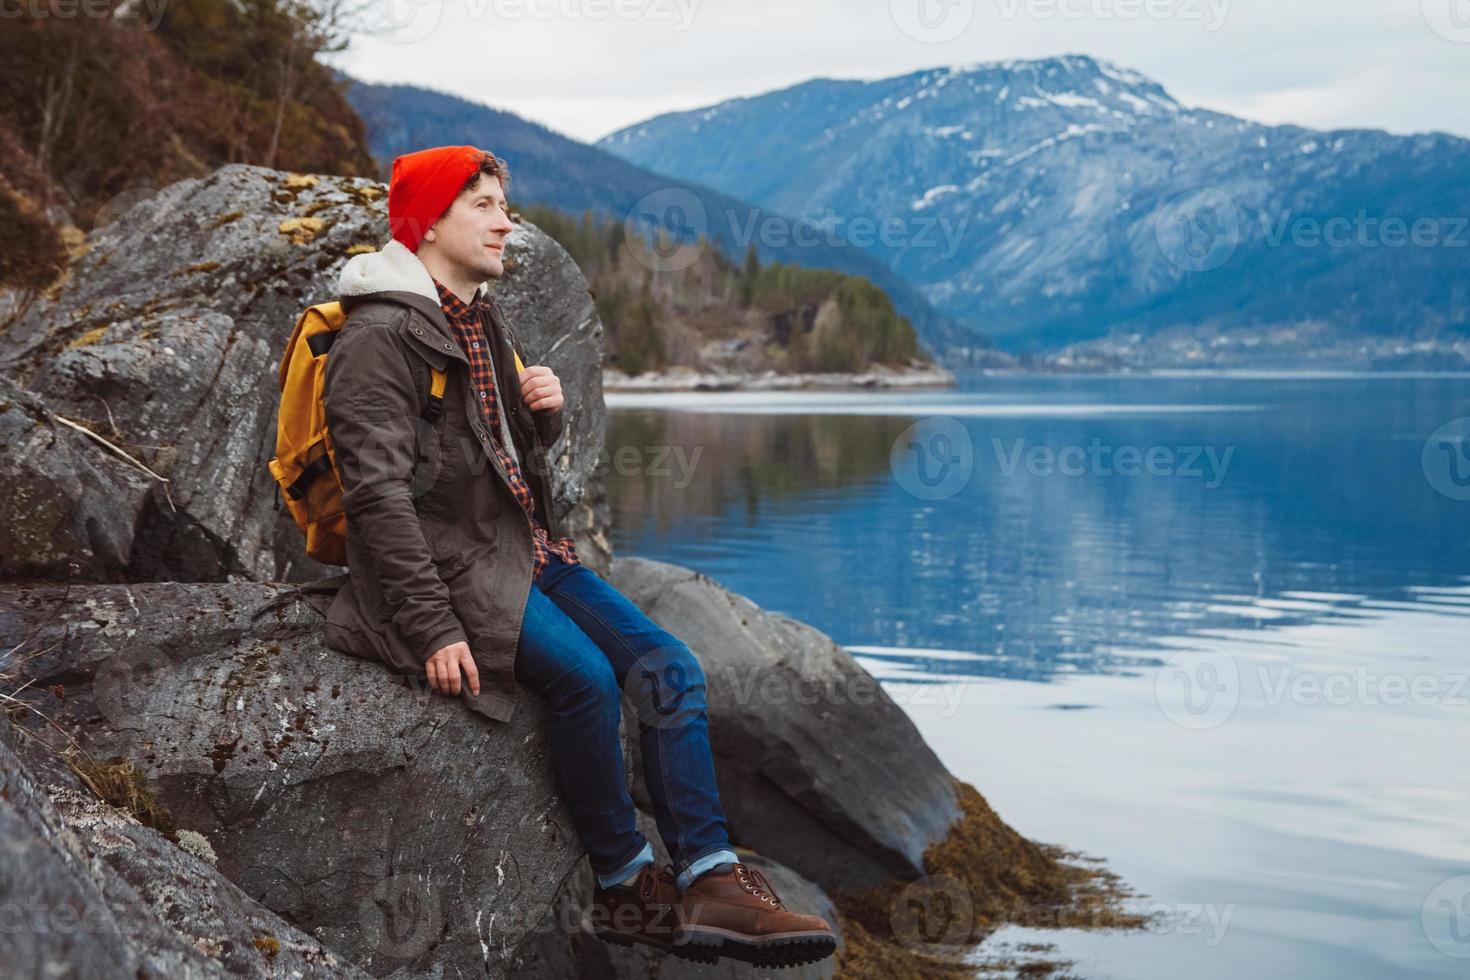 Young man with a yellow backpack wearing a red hat sitting on the shore on the background of mountain and lake. Space for your text message or promotional content. Travel lifestyle concept. photo